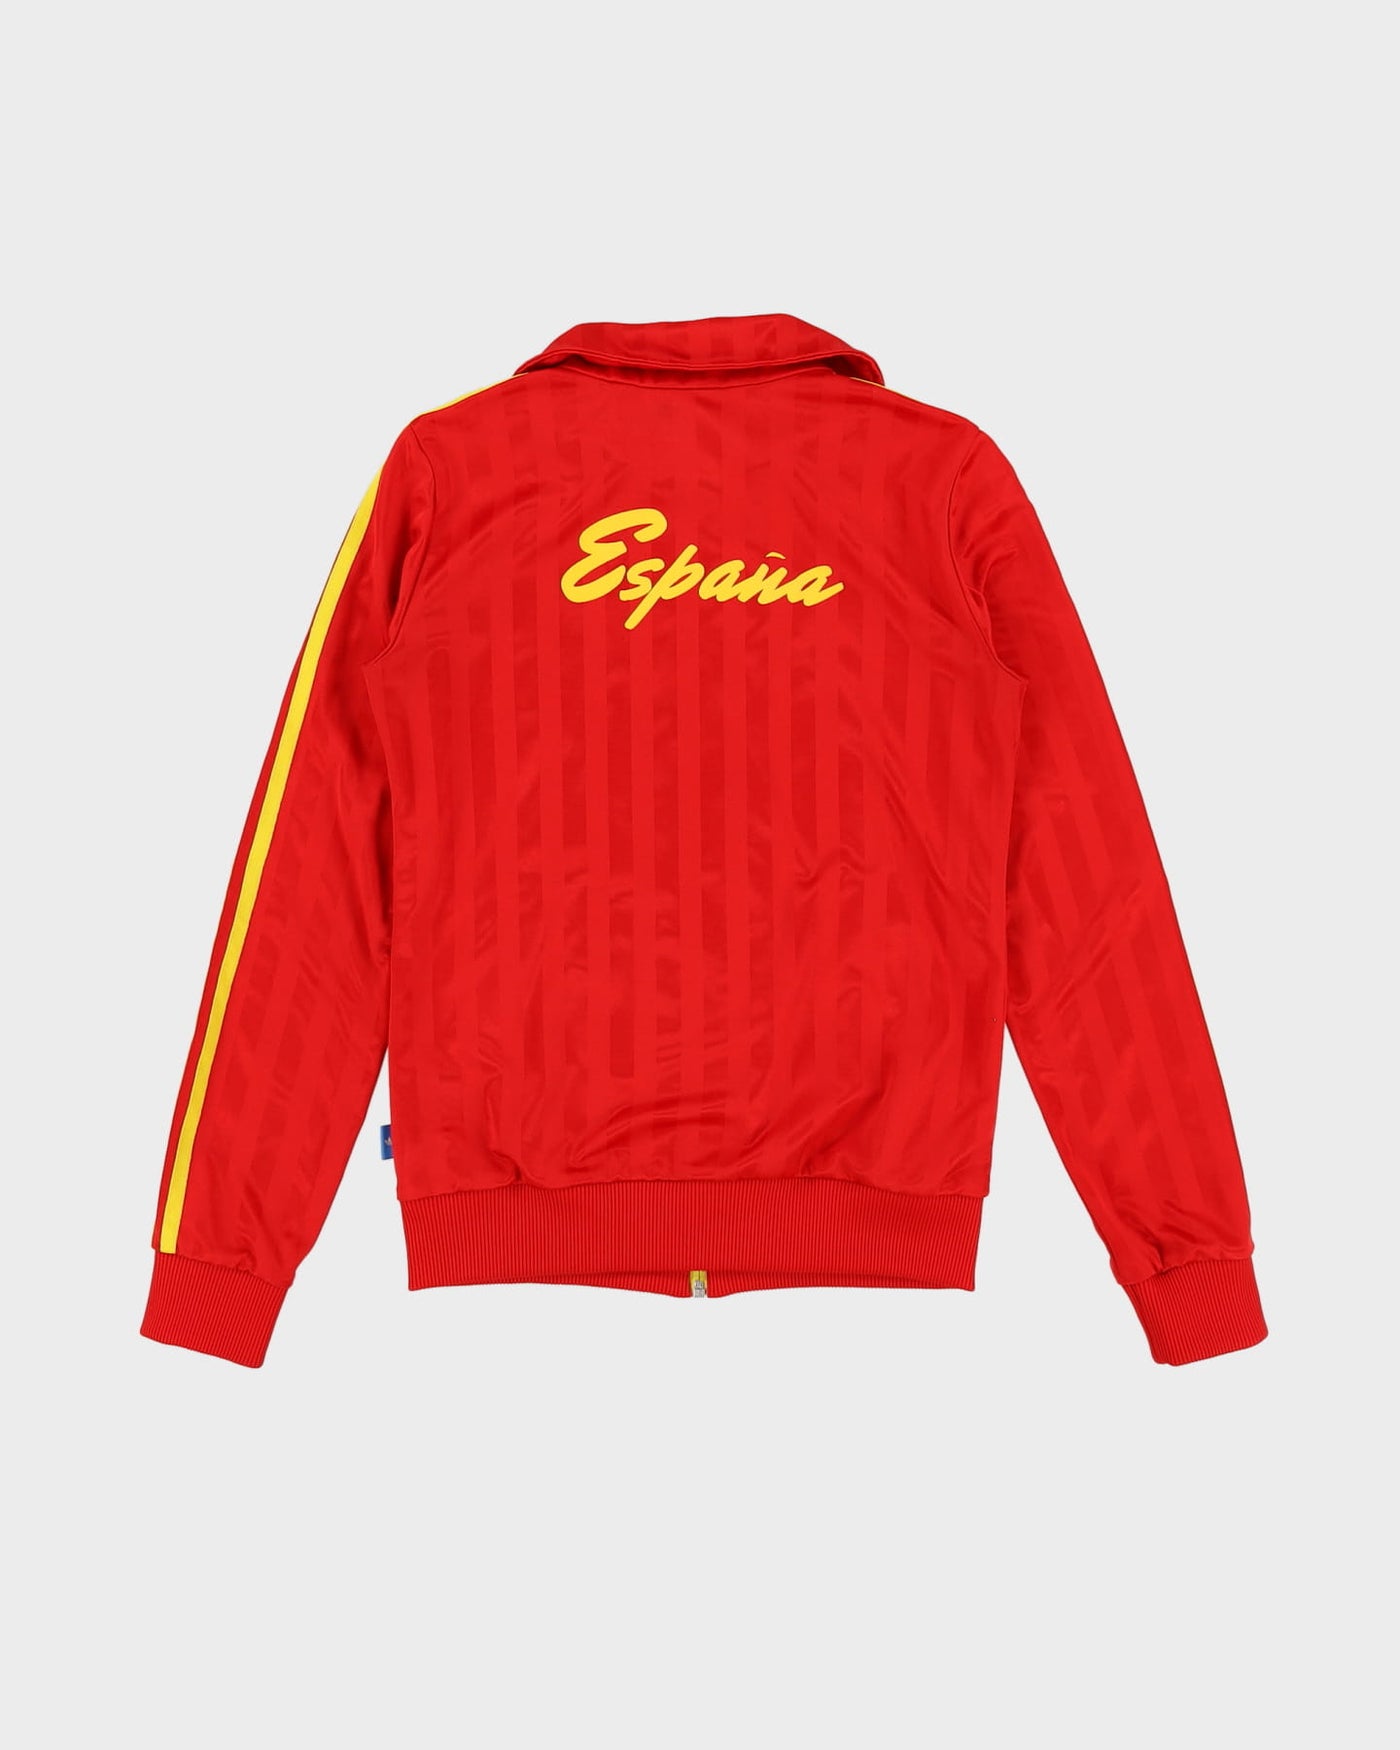 00s Adidas Spain Red / Yellow Track Jacket - S